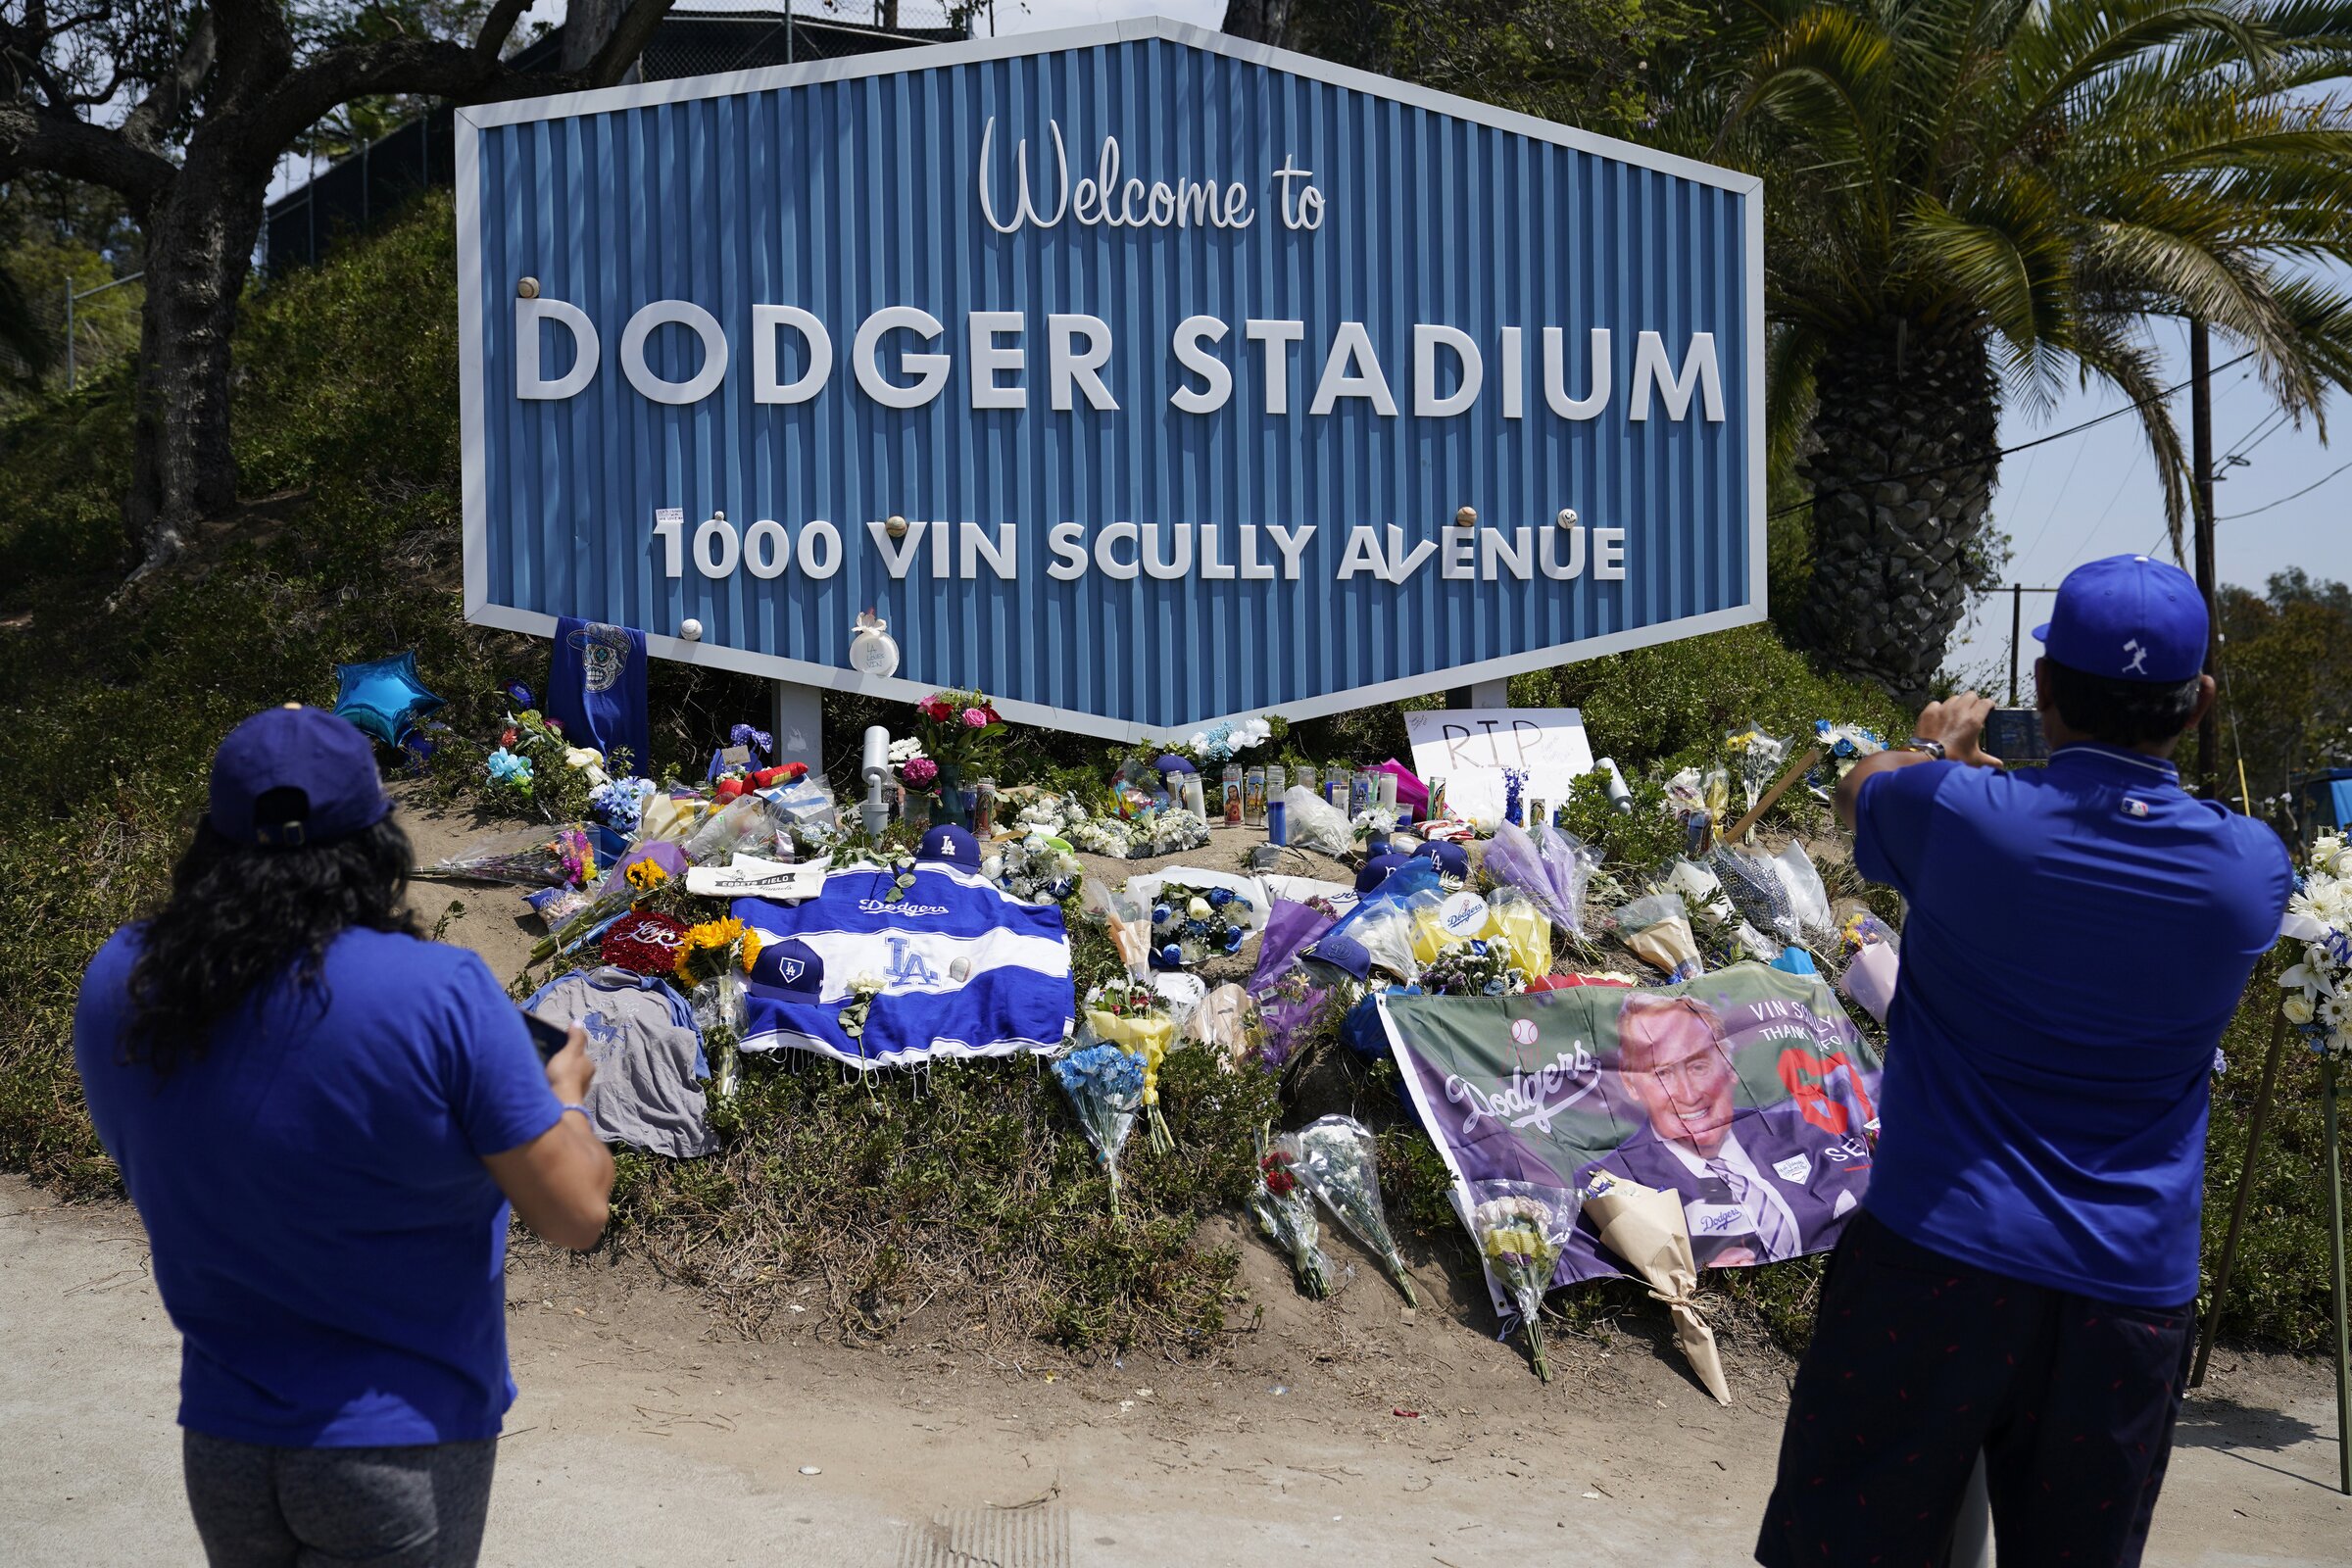 Rip Vin Scully Los Angeles Dodger Sports Commentator Thank You Vin